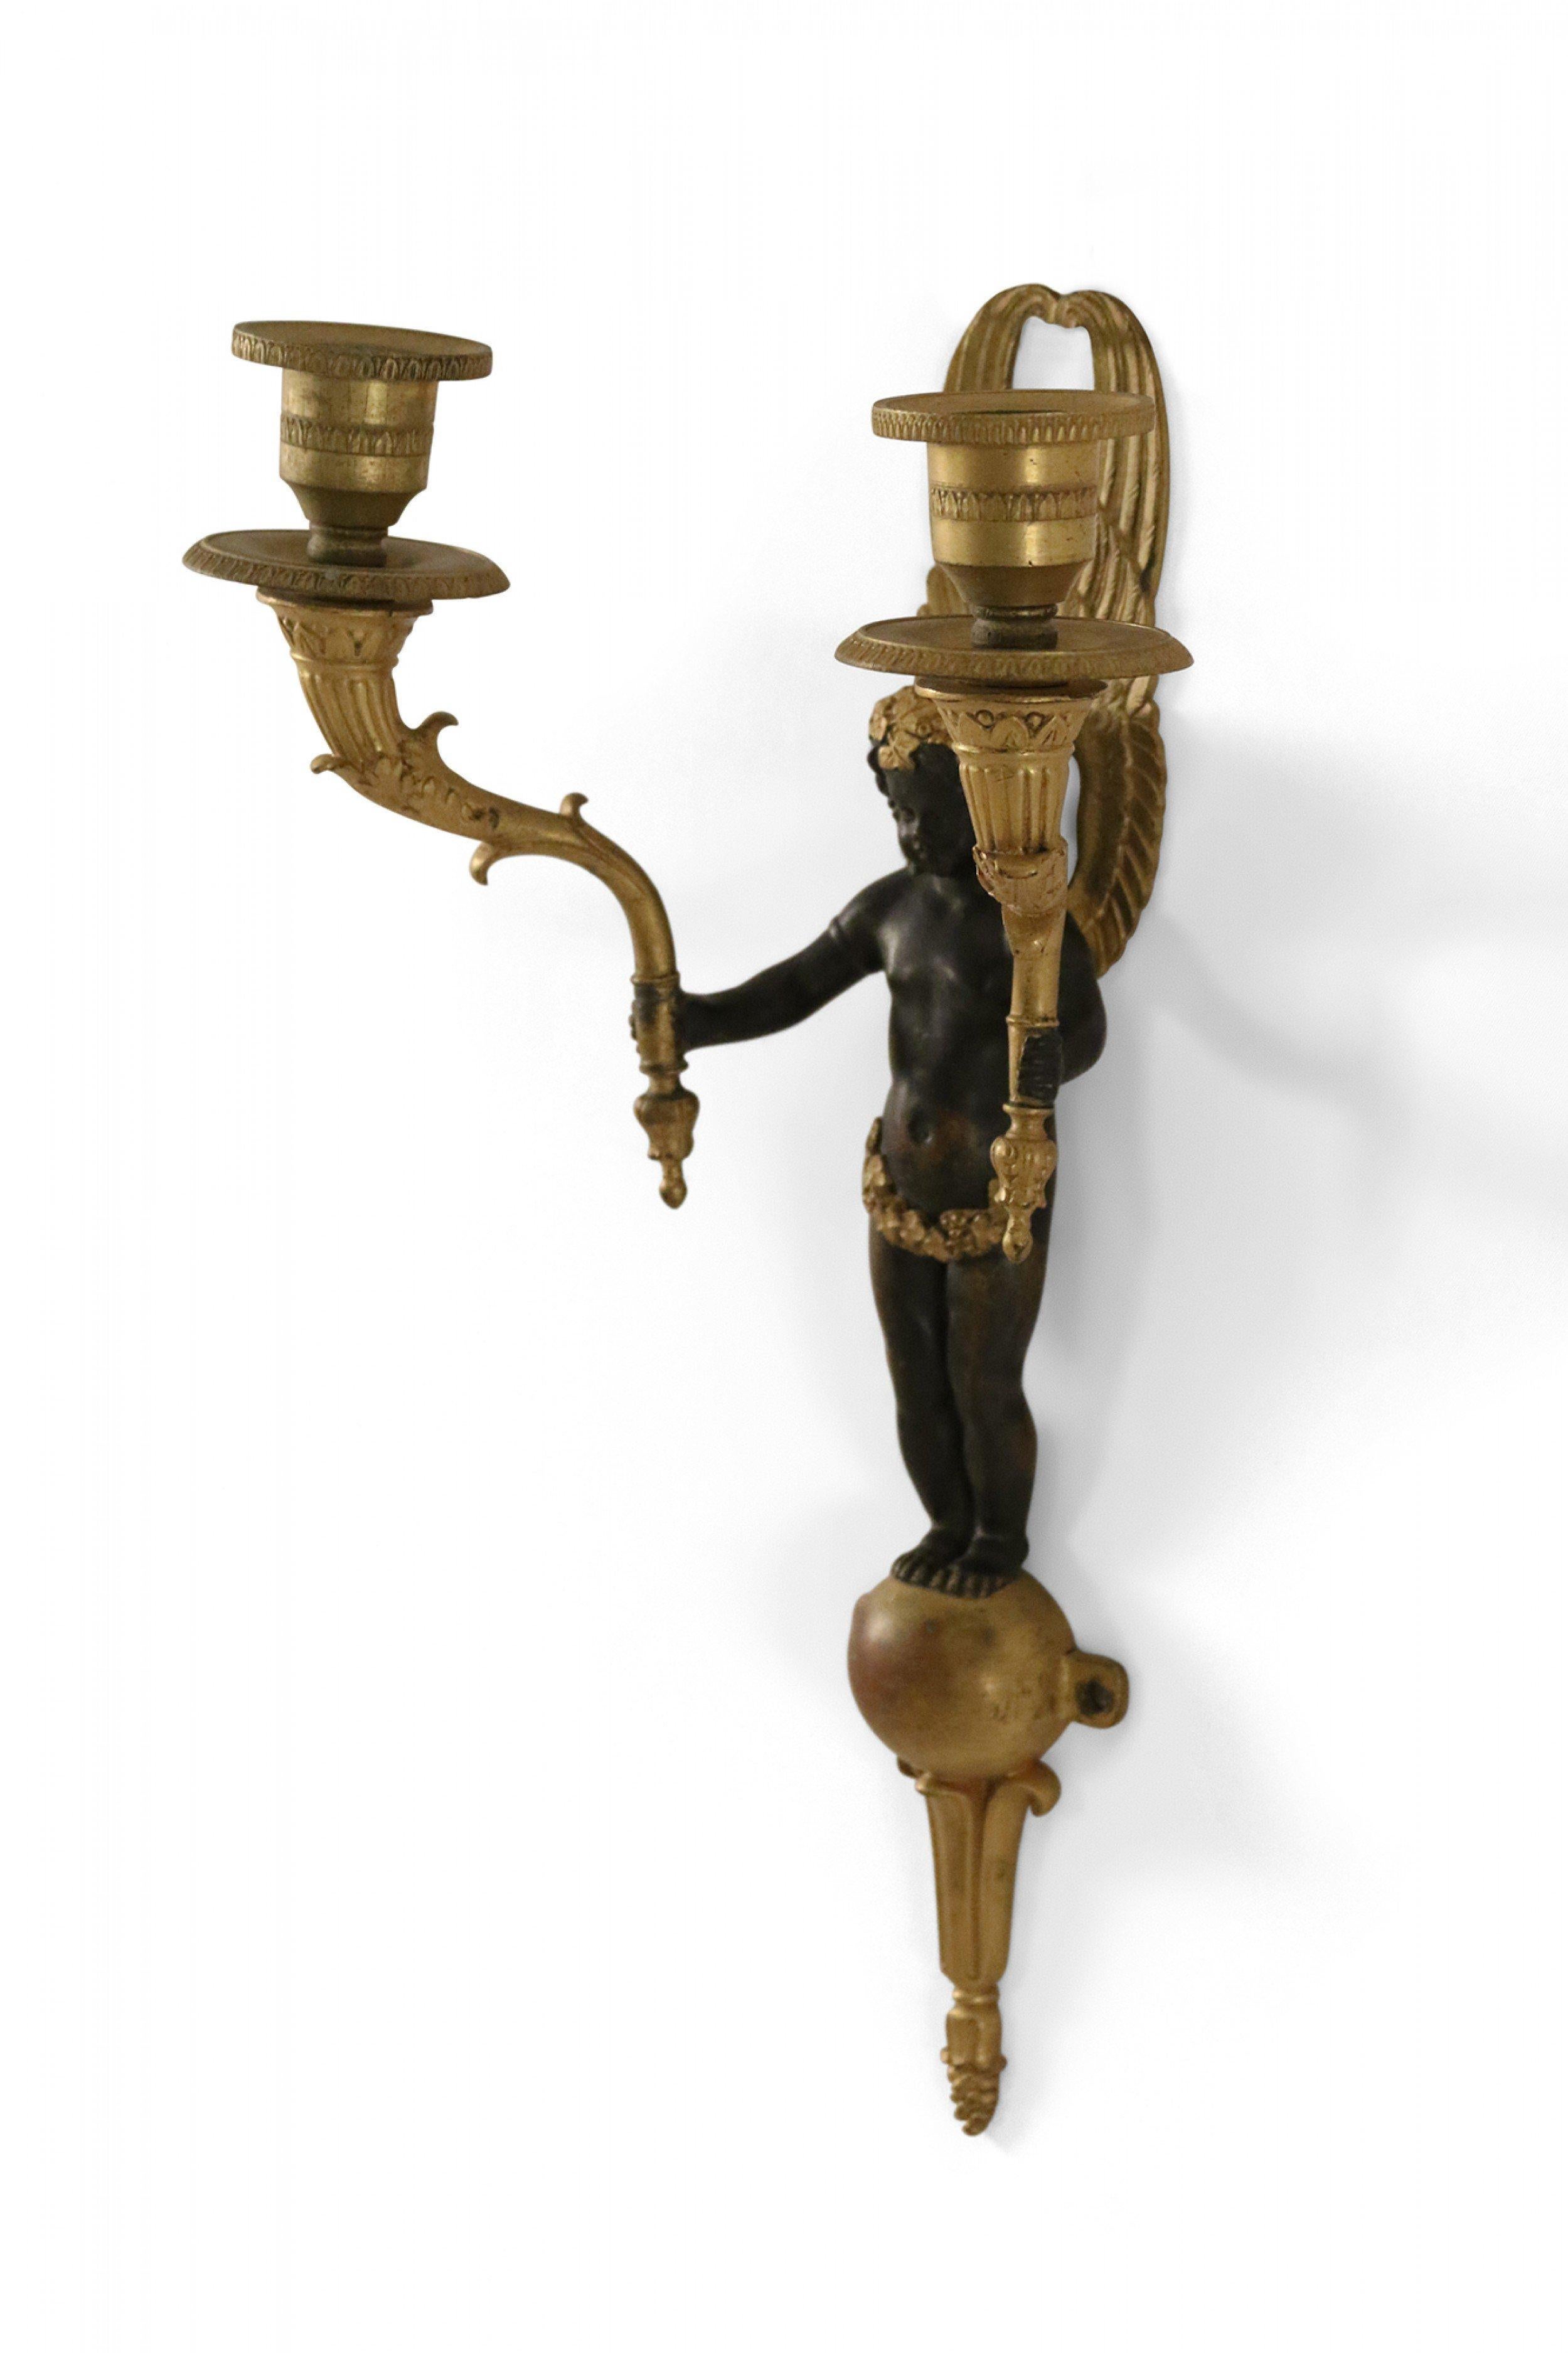 French Empire-style (19th century) ebonized bronze and gilt trim caryatid wall sconce with a central winged figure holding two candleholders.
 